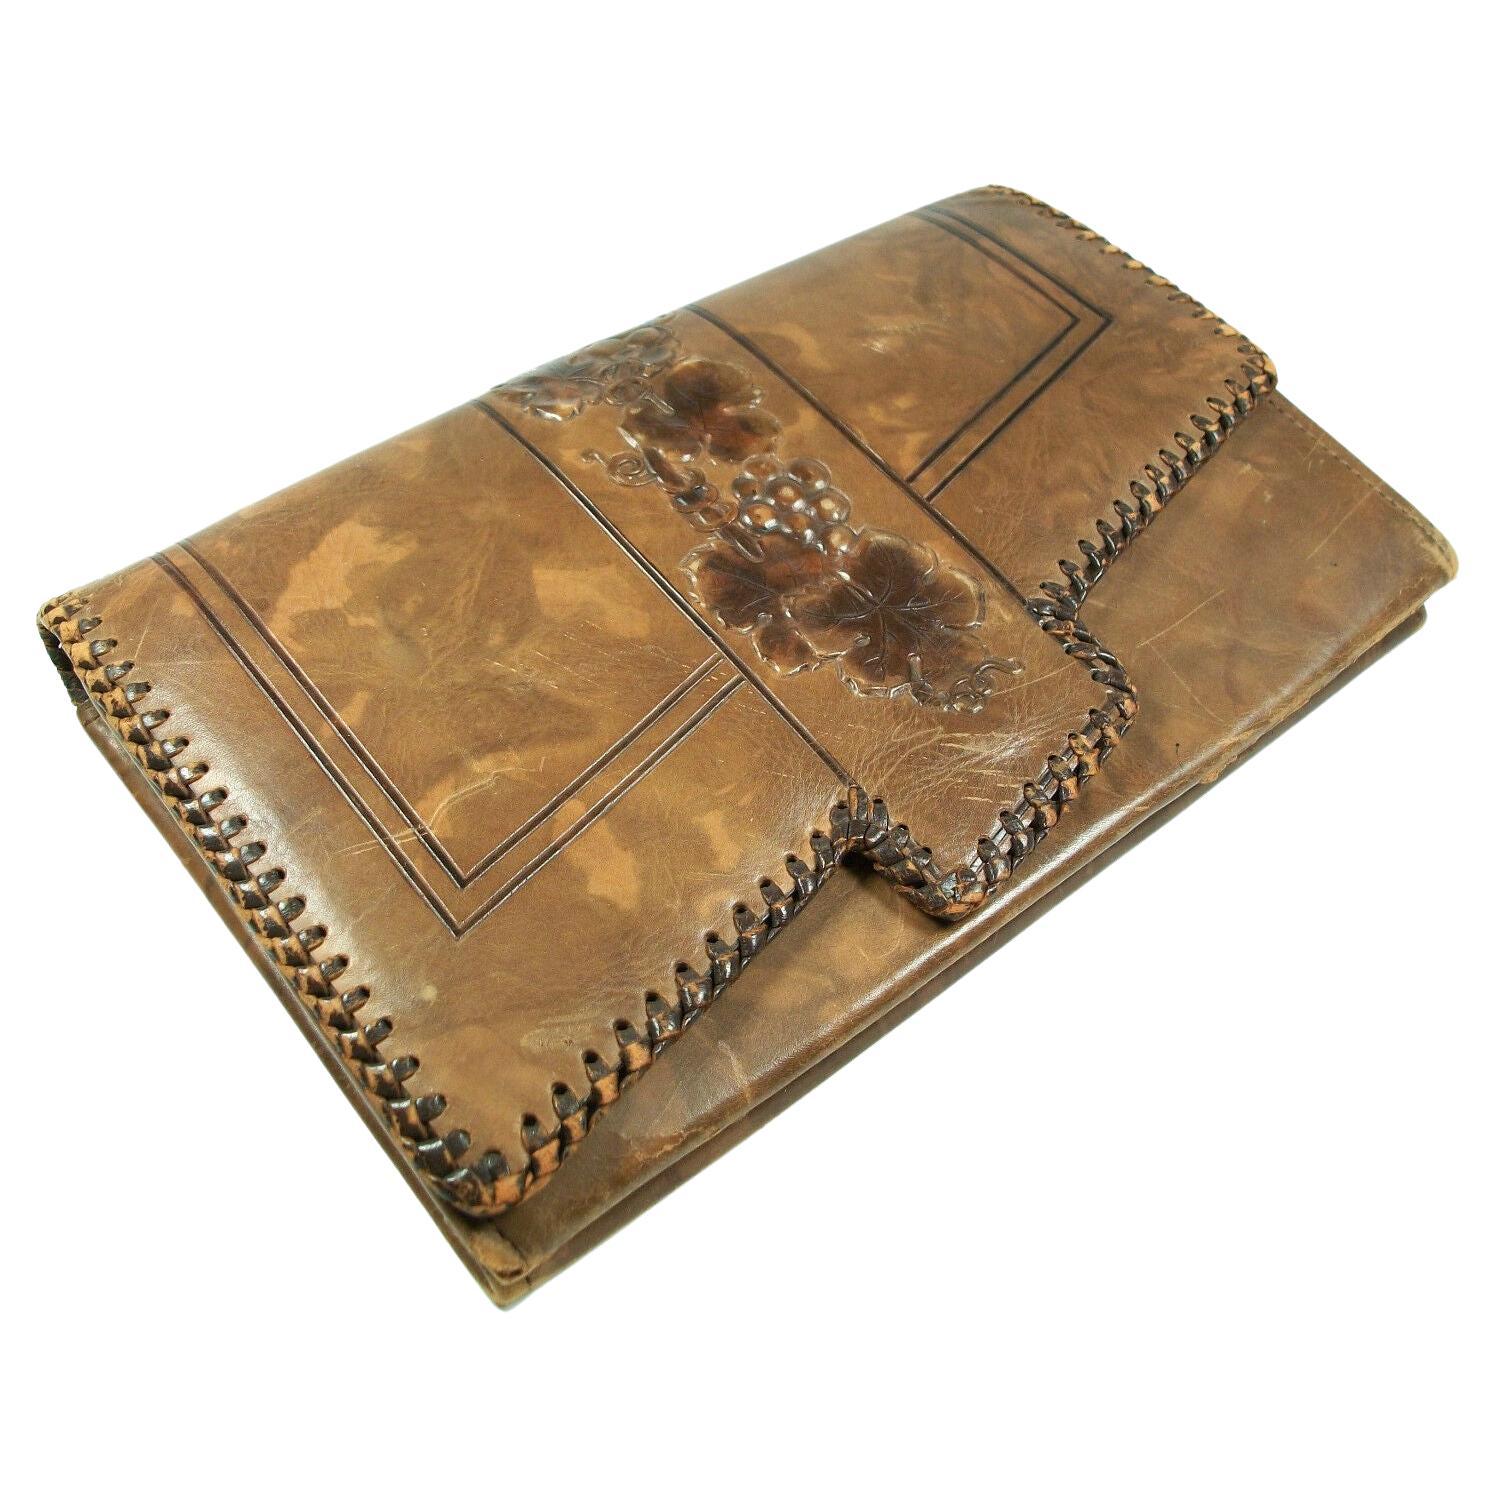 ARDEN FOREST - Vintage Tooled Leather Clutch - Whip-stitched Edge - Circa 1930's